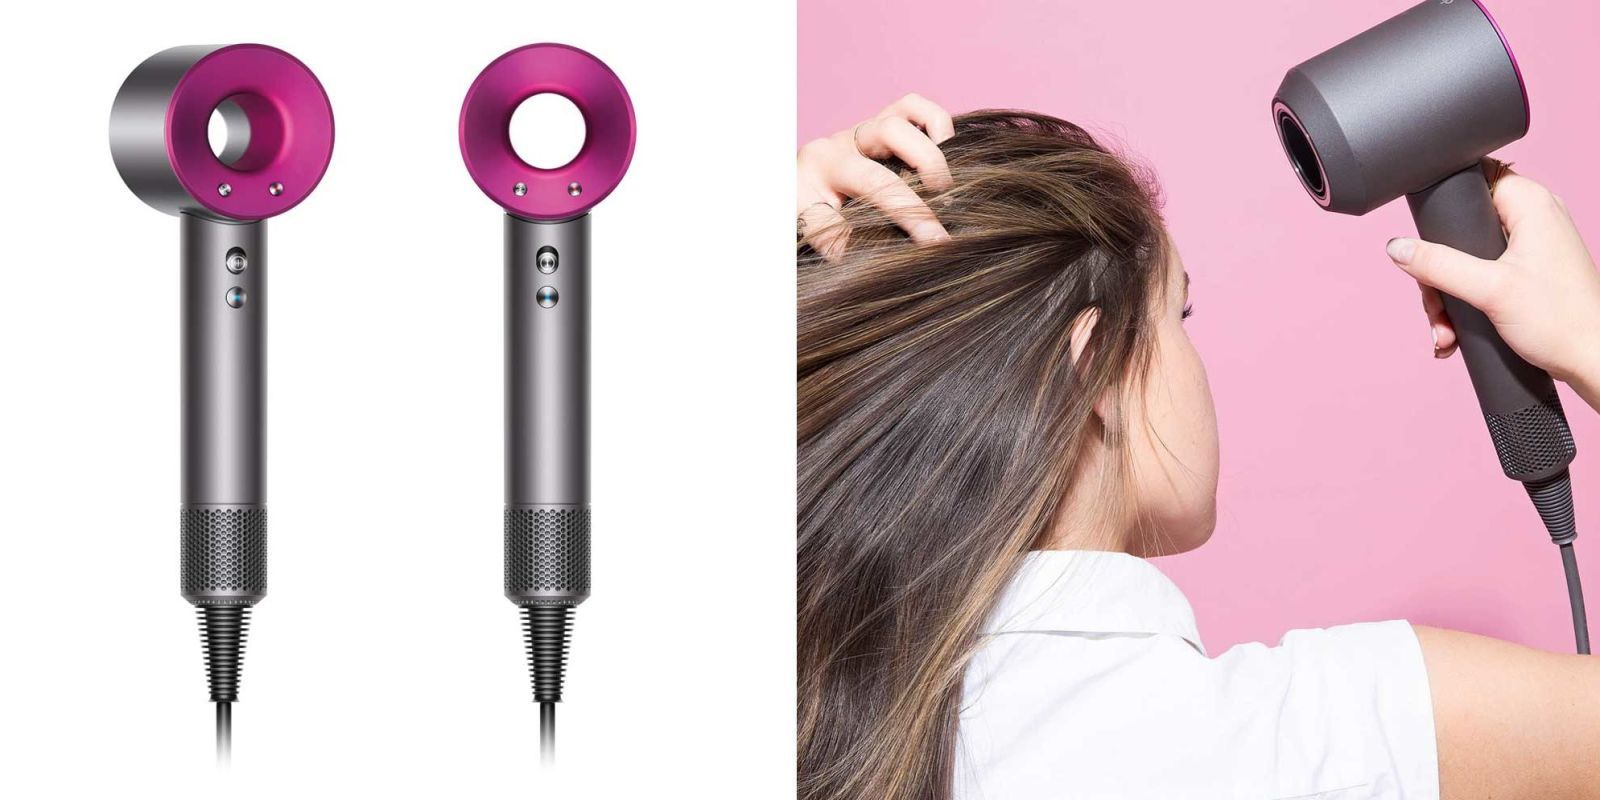 Dyson hair dryer: 5 Things you need to know before buying it